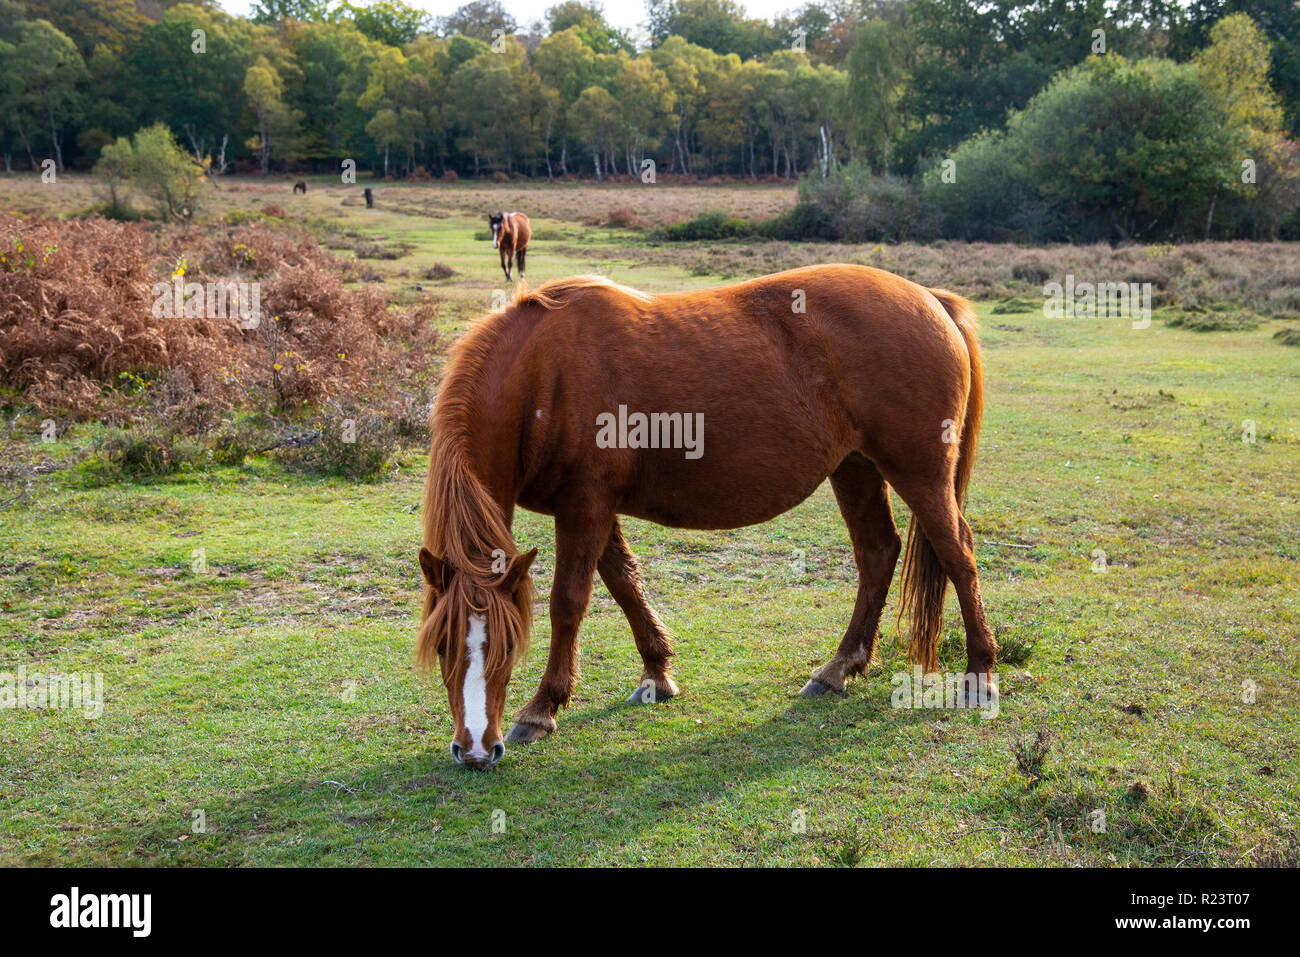 Chestnut New Forest Pony with white blaze grazing on heathland in the New Forest National Park, Hampshire, UK, England Stock Photo